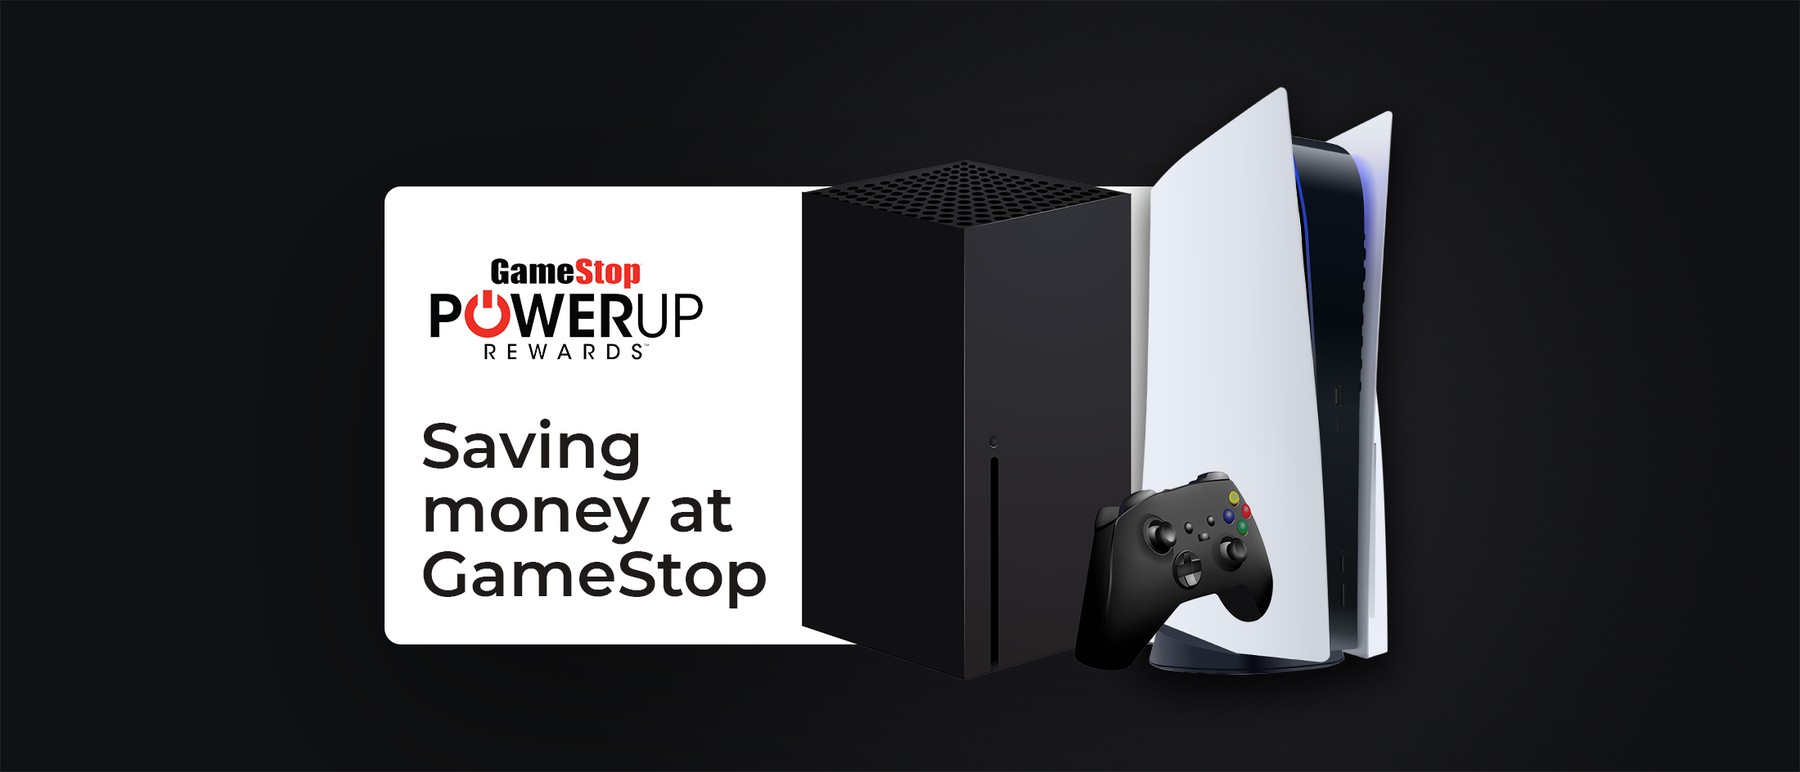 Game on: Saving money at Gamestop is easy with a PowerUp Rewards membership